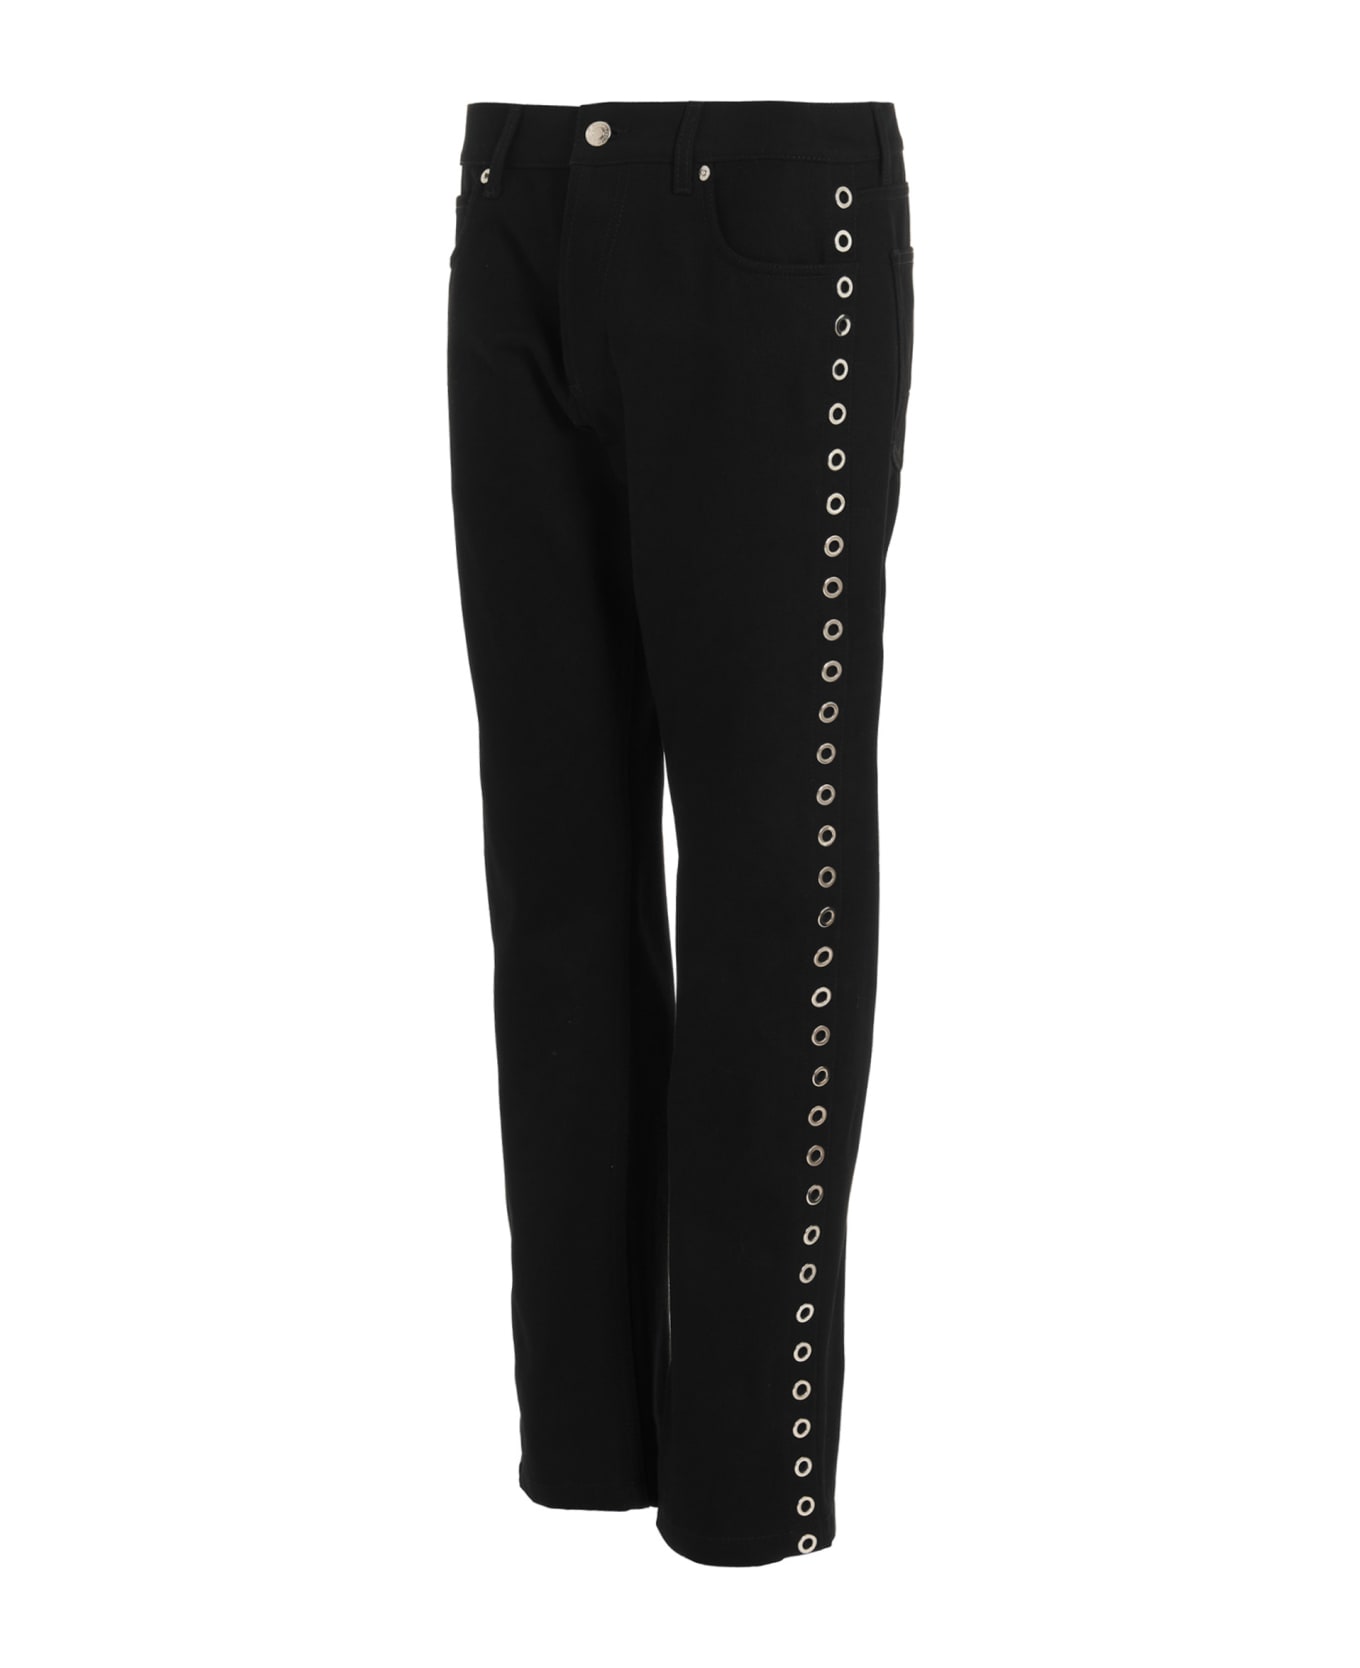 Alexander McQueen Studded Jeans - Black   ボトムス